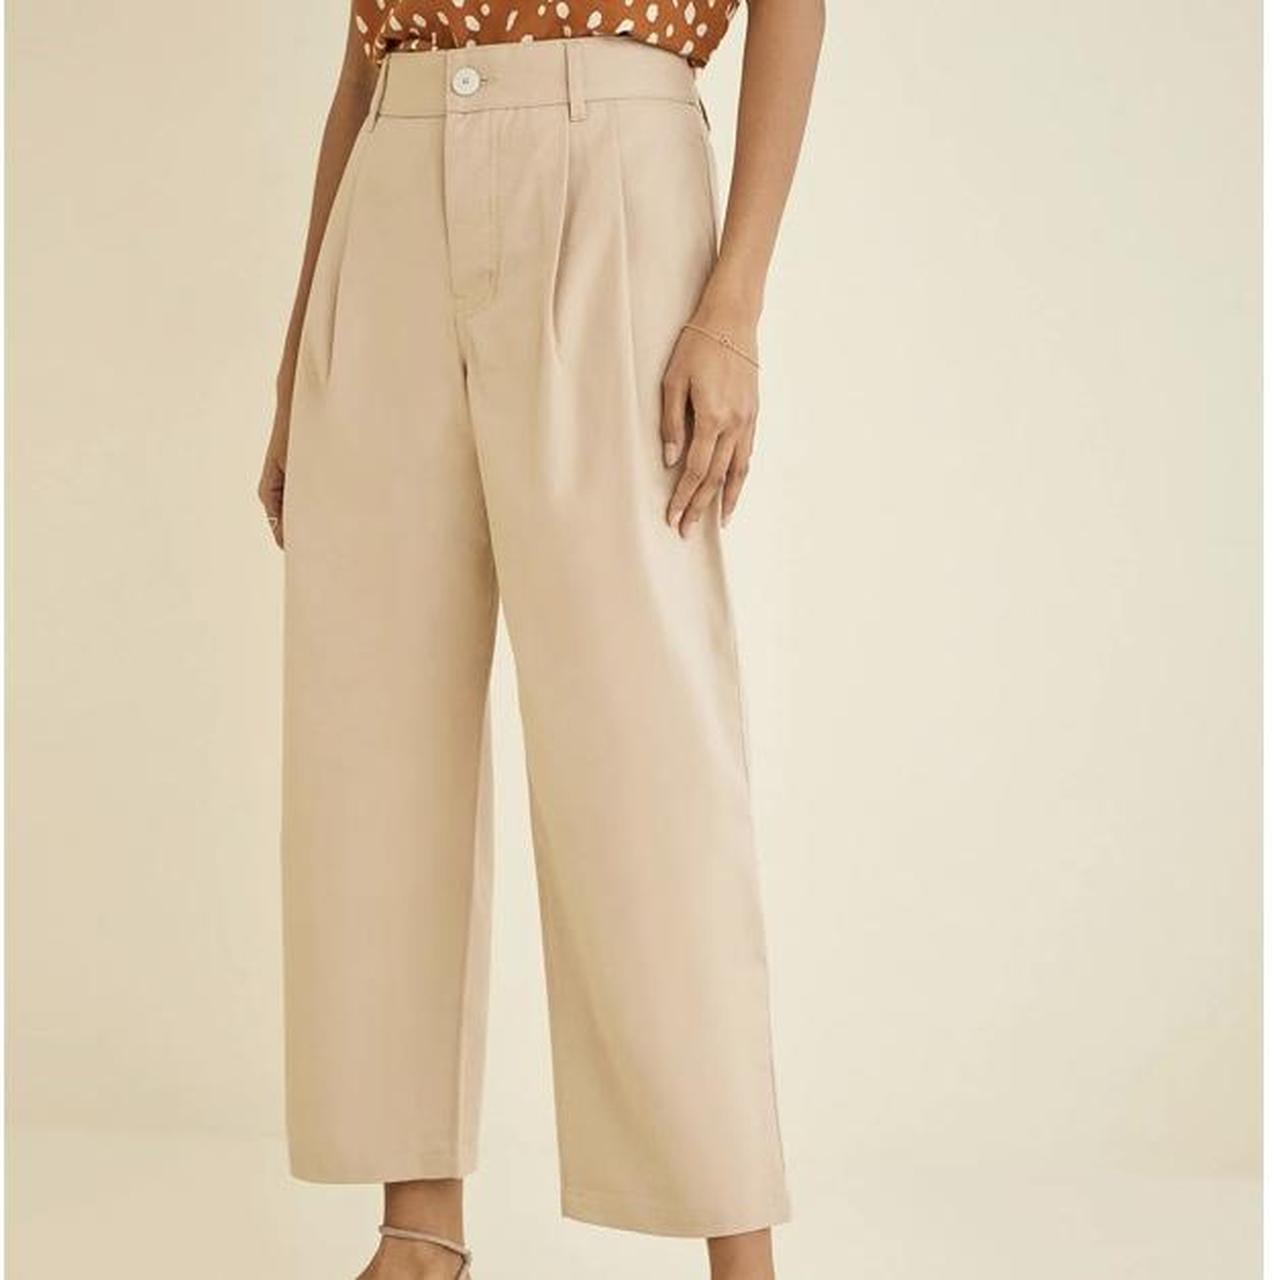 Amour Vert Women's Tan and Cream Trousers (2)